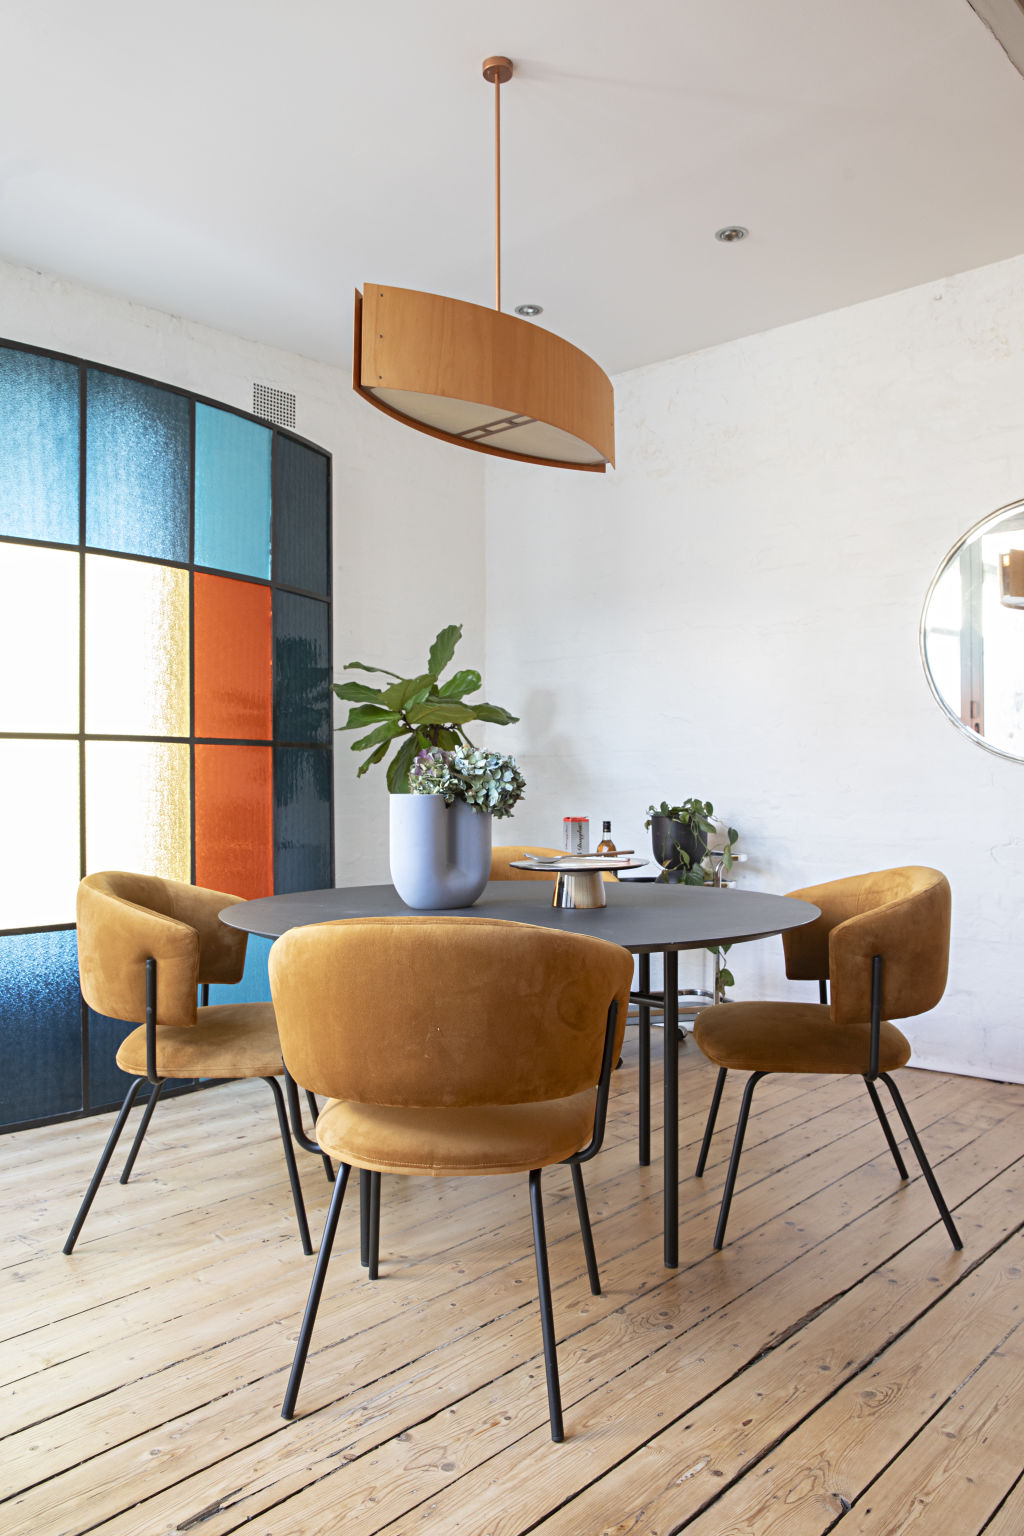 Stained-glass panes are a colourful additon to the dining space. Photo: Natalie Jeffcott